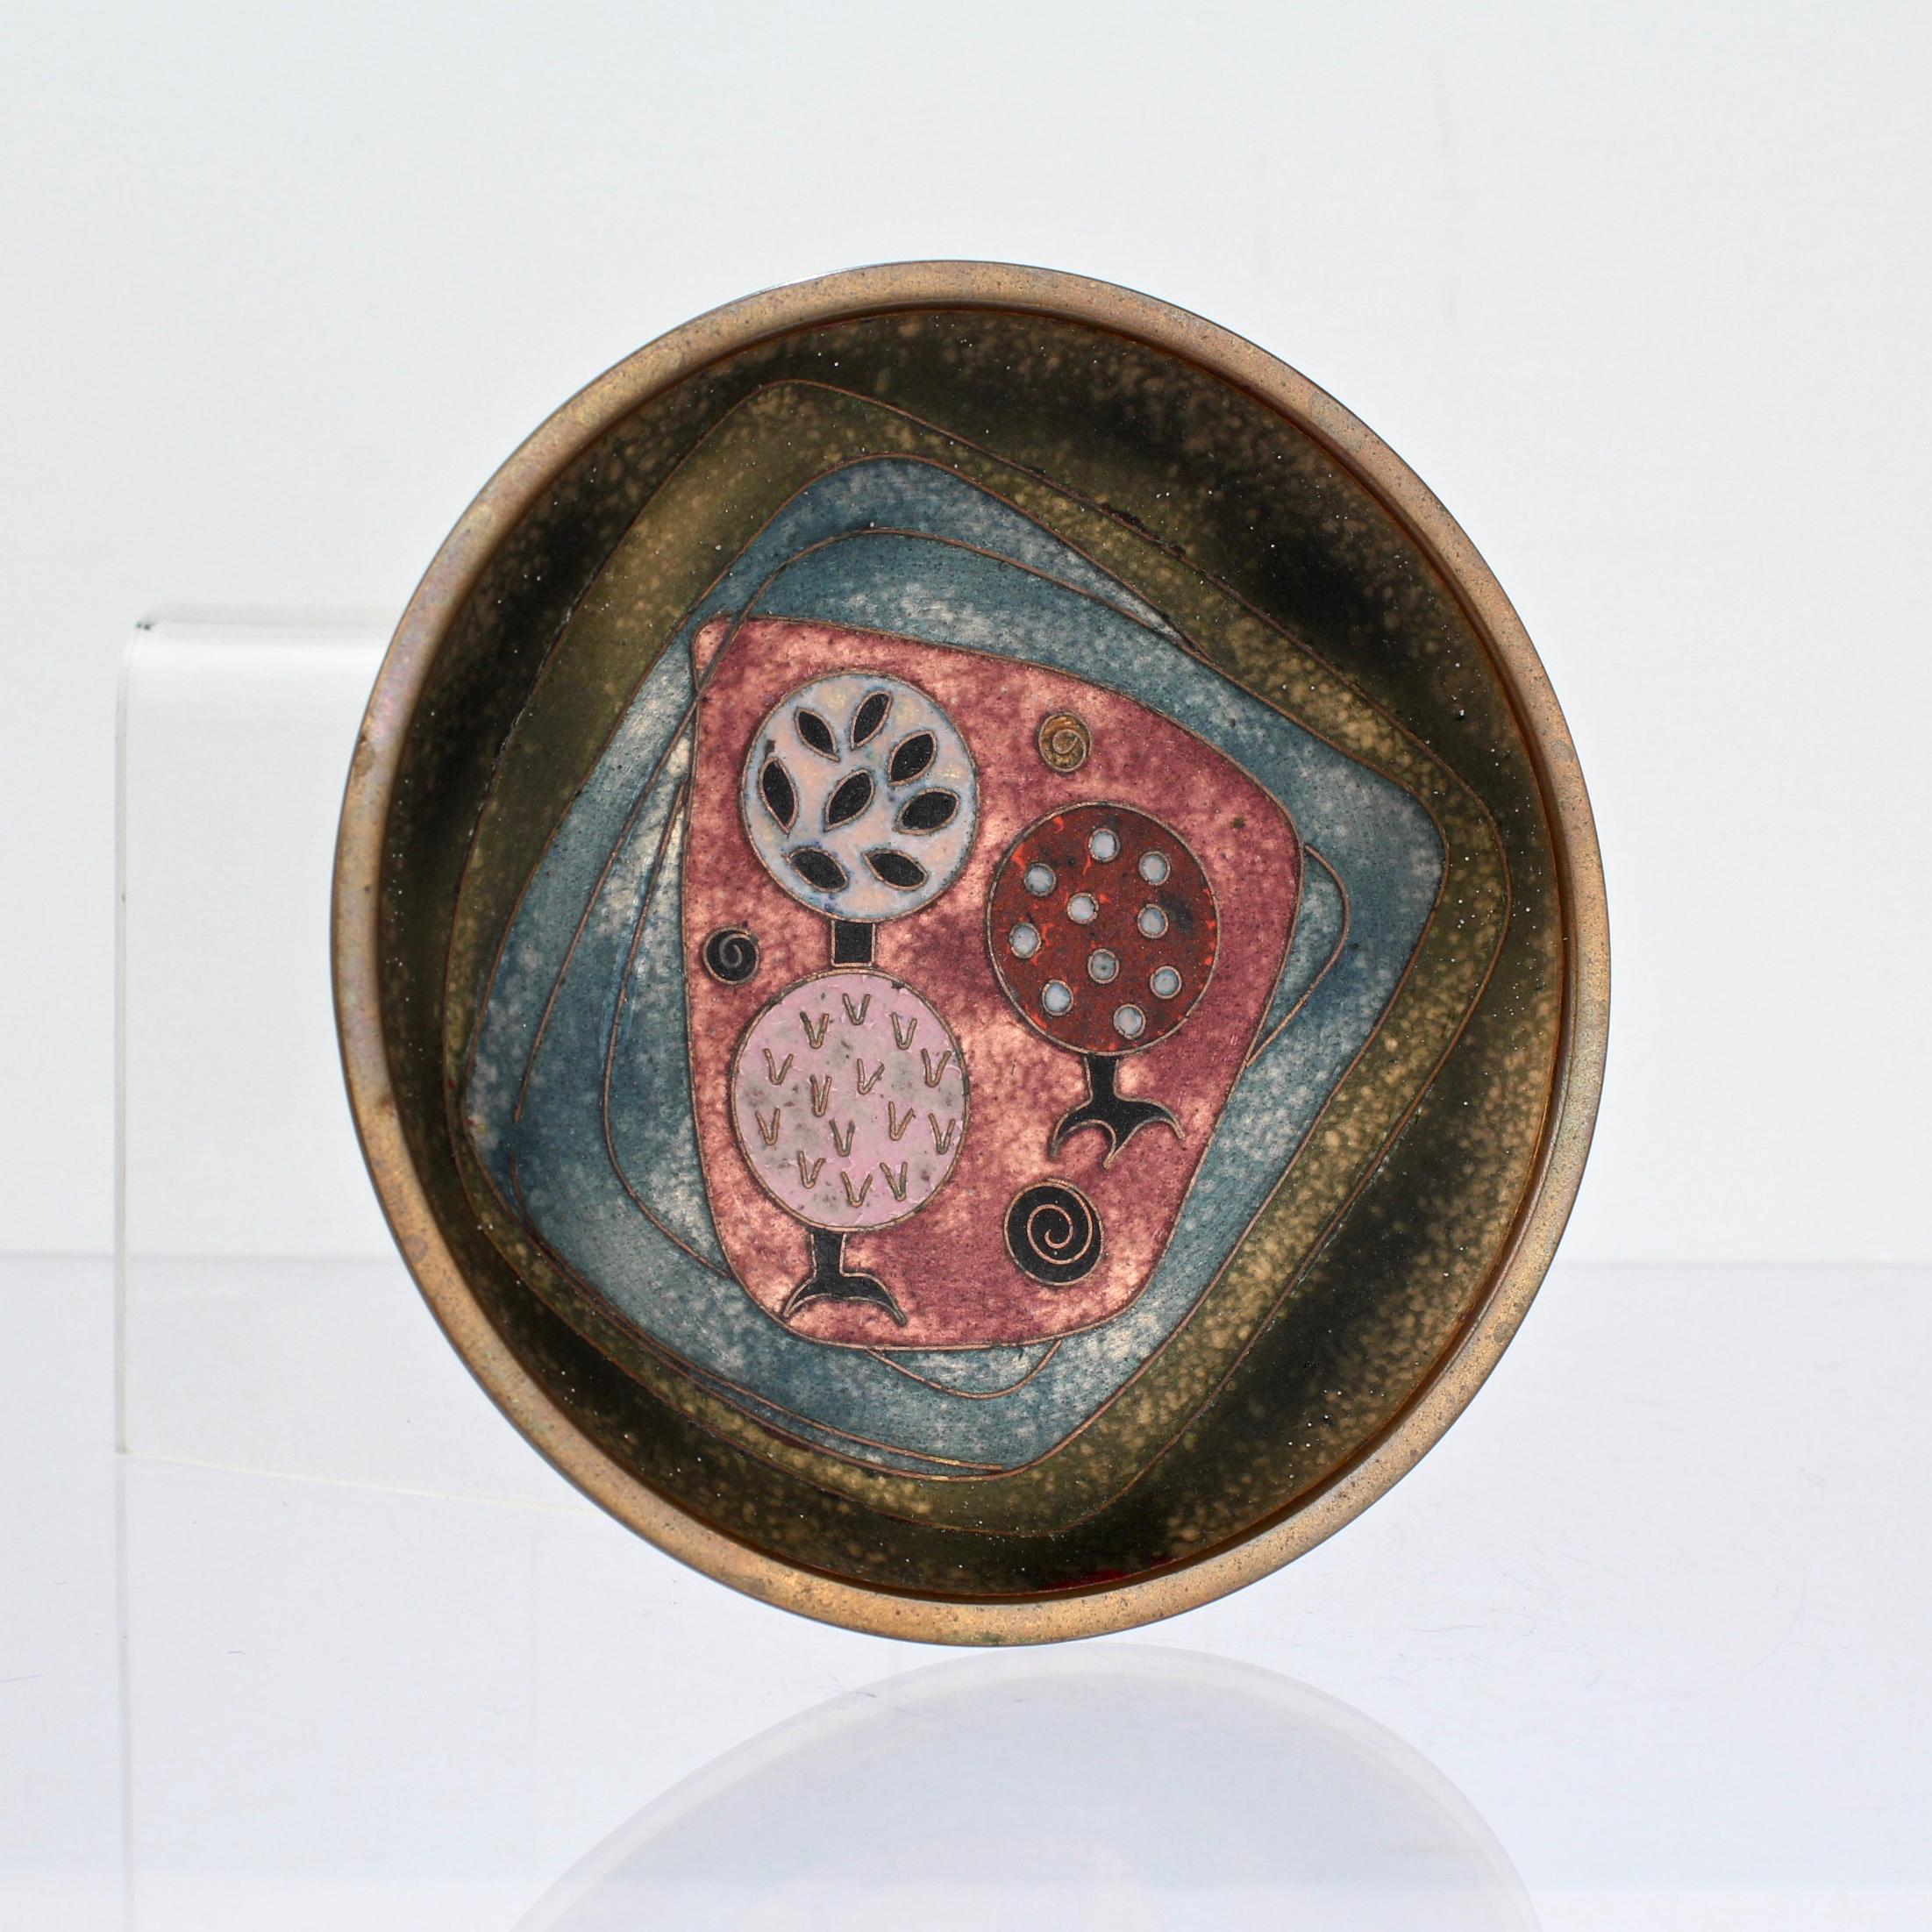 A wonderful, small enameled copper dish from the renowned enamelist and jewelry maker Käthe Ruckenbrod.

Käthe Ruckenbrod was Bauhaus trained and was one of the 20th century's important enamelists.

This dish is perfect for a table top or vanity as